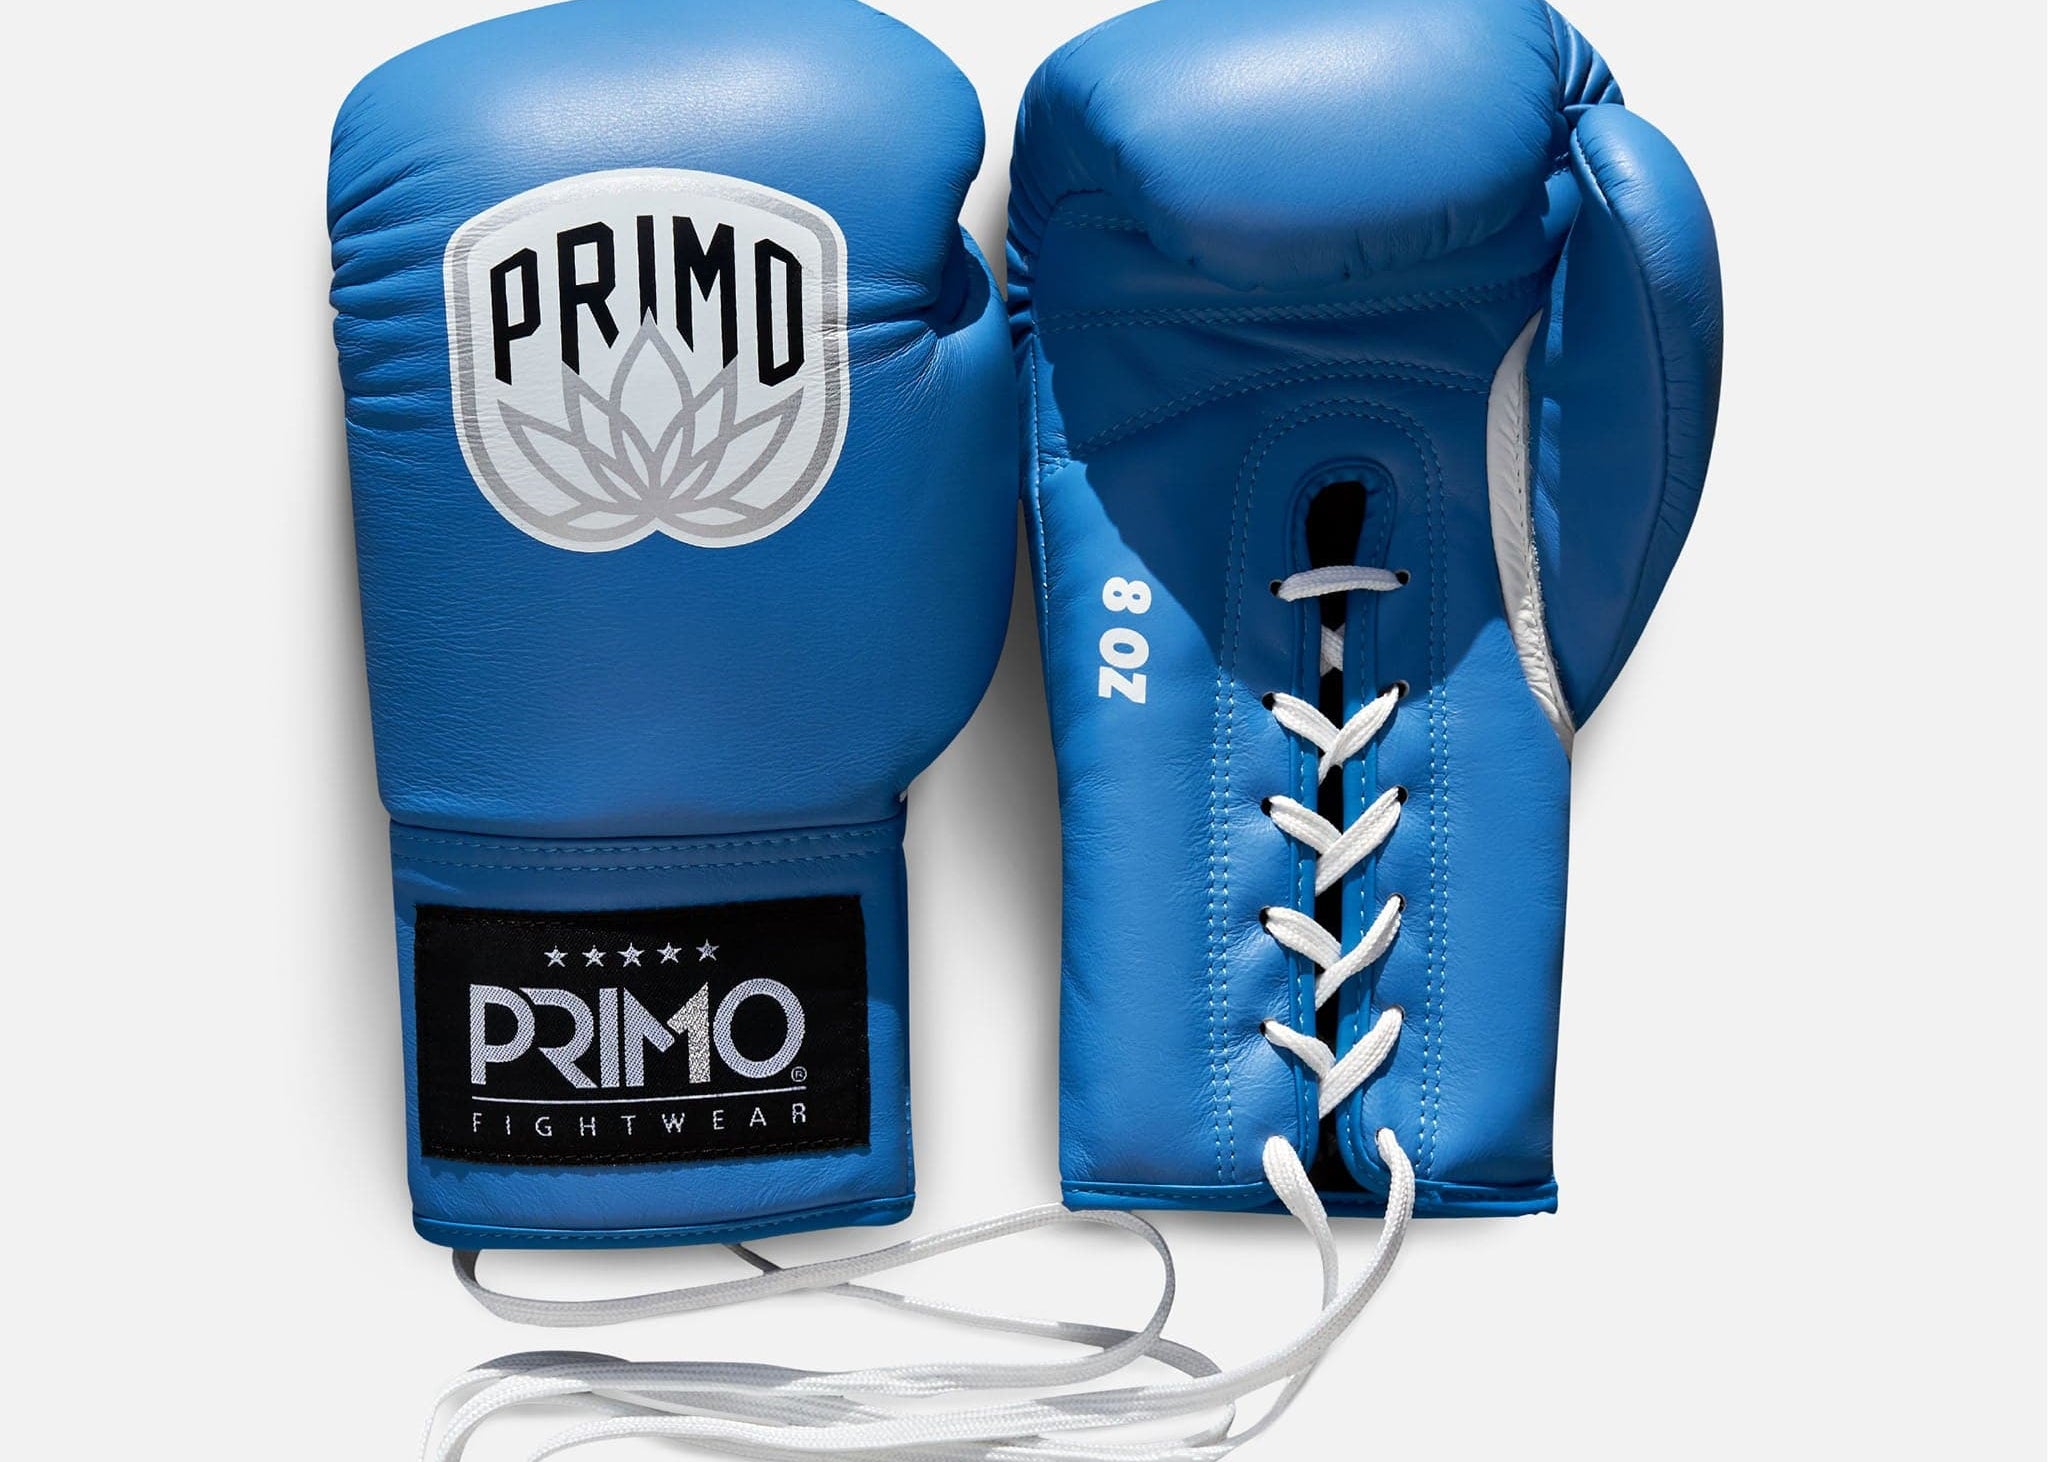 Primo Fight Wear Official Primo Pro Lace Up Boxing Gloves - Blue